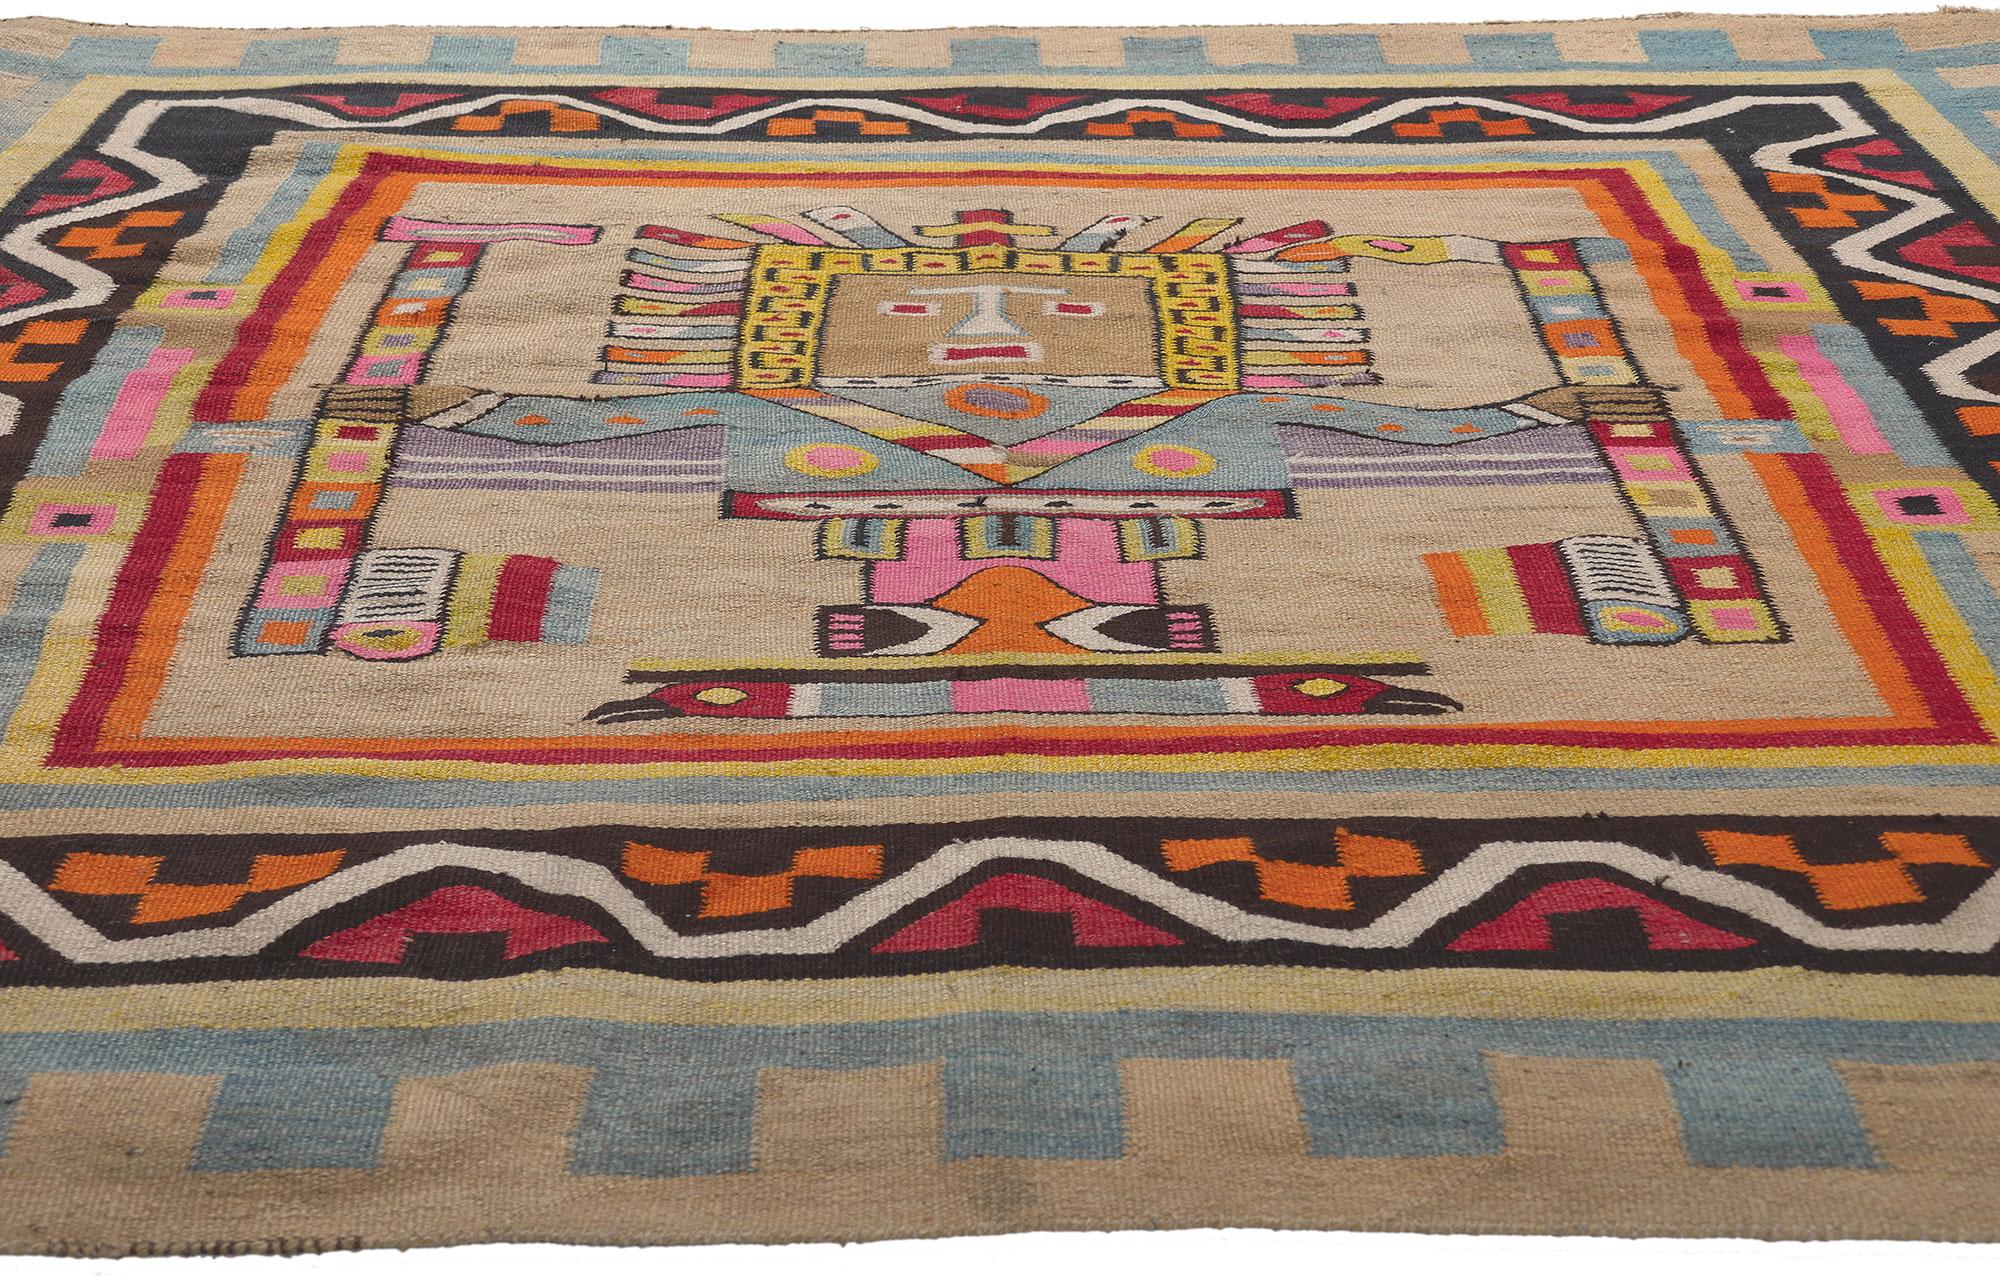 Pre-Columbian Colorful Vintage South American Kilim Rug with Pre-Incan Viracocha Deity  For Sale